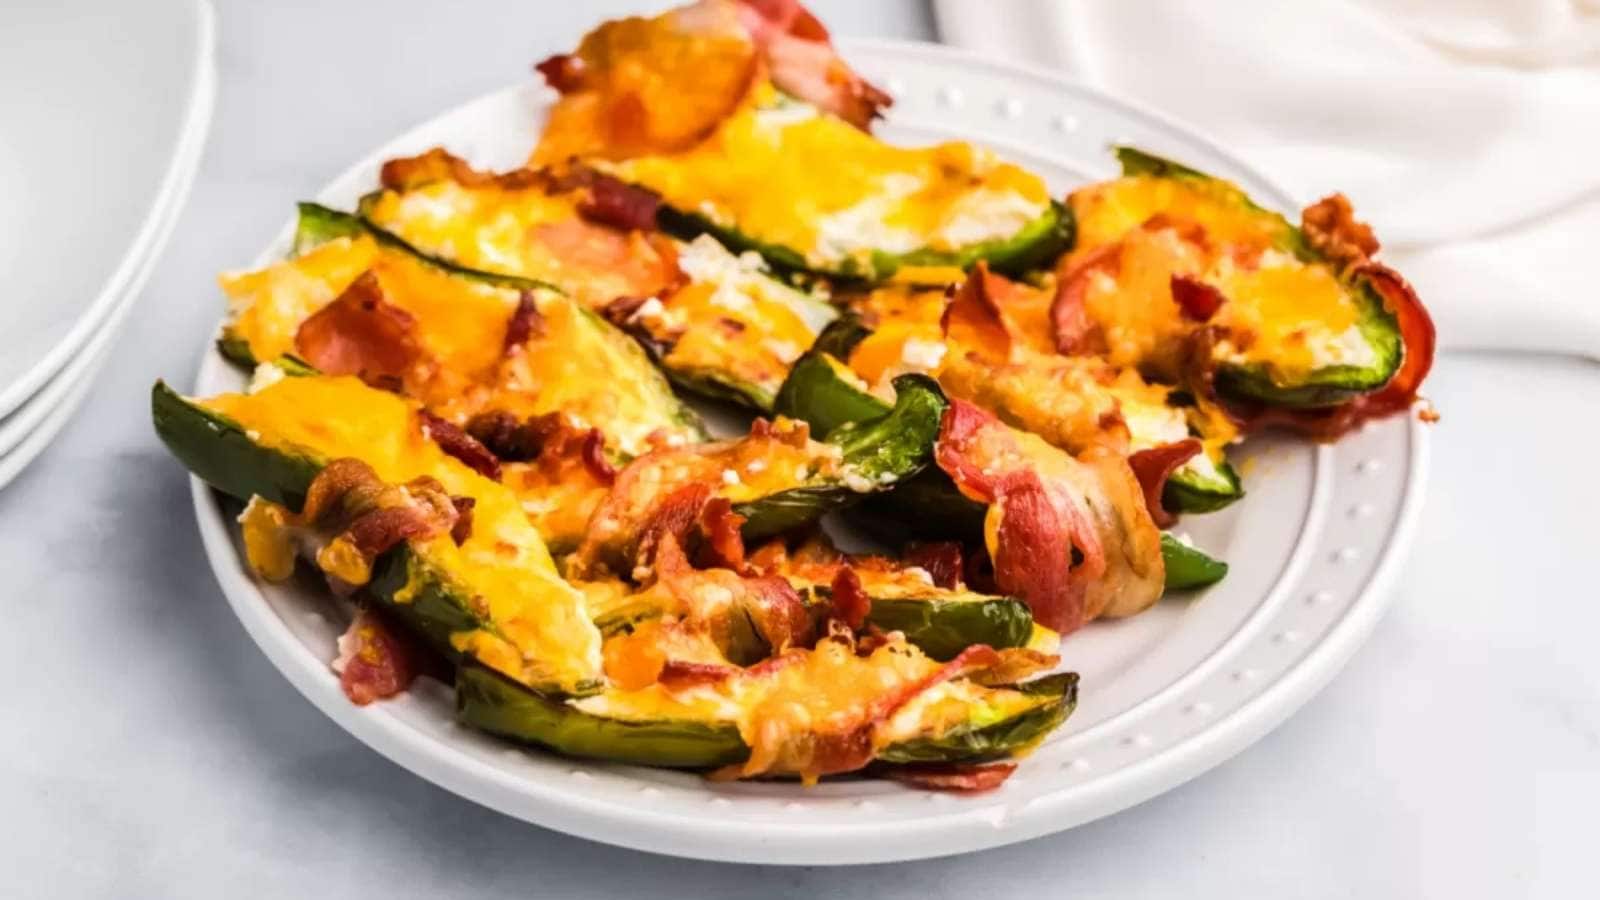 Stuffed jalapenos with bacon and cheese on a plate.